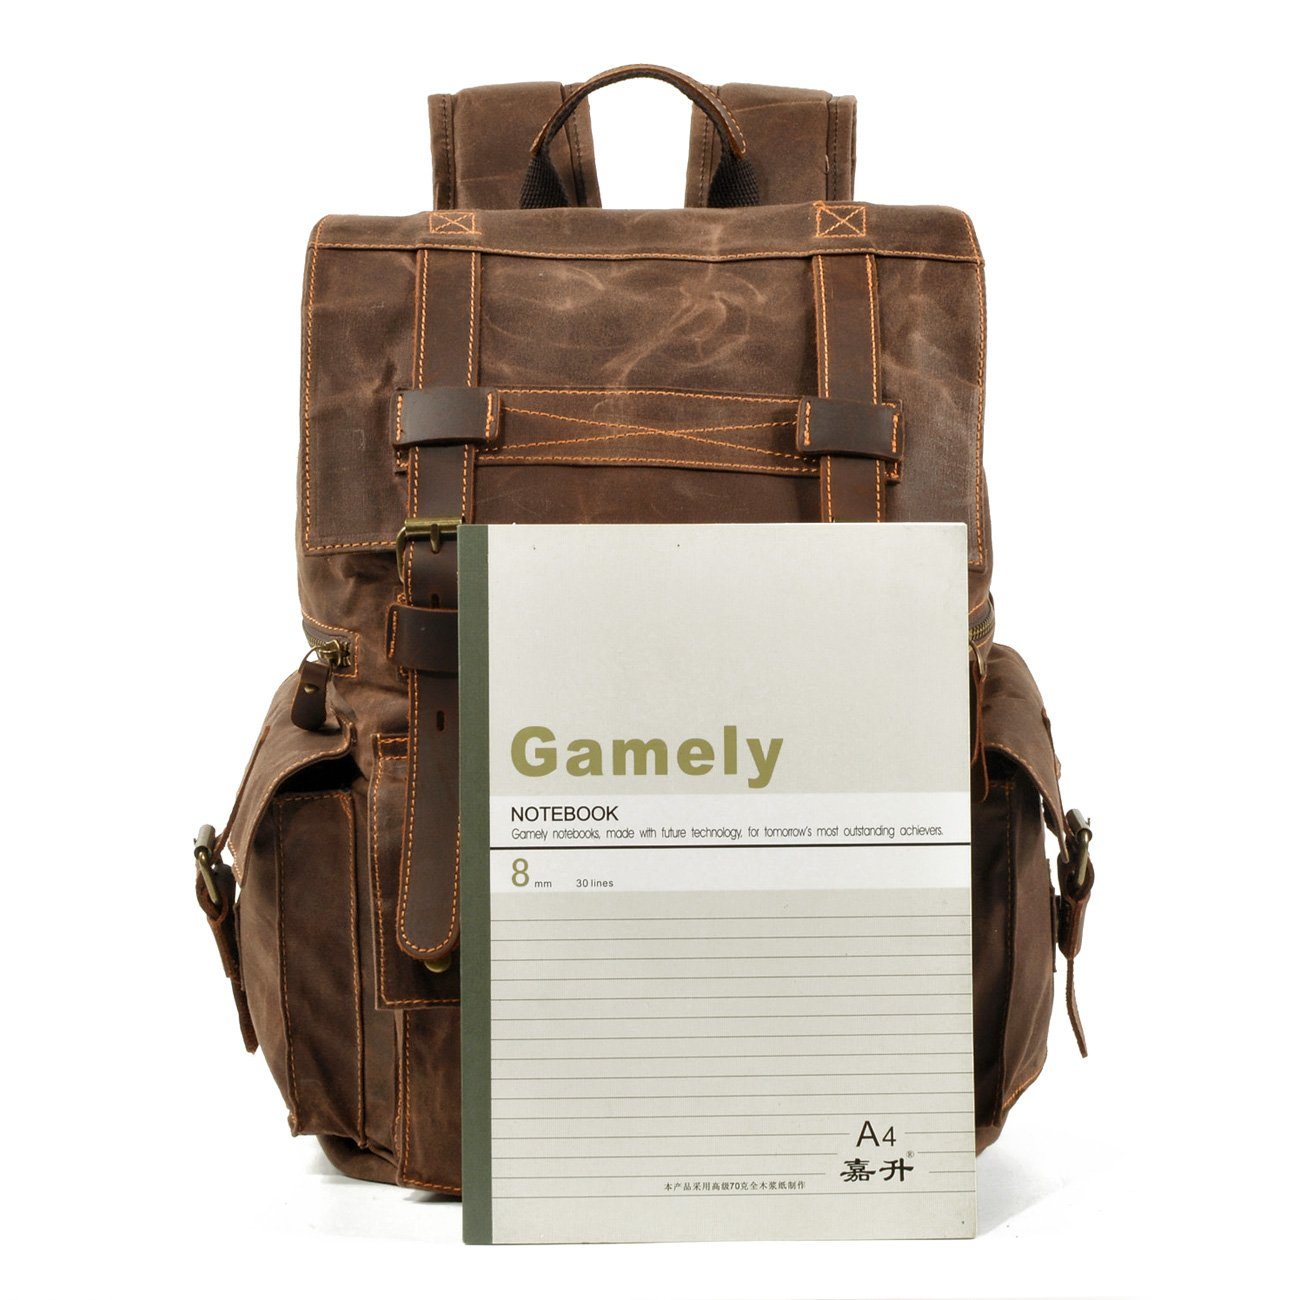 Leather-Trim Canvas Backpack